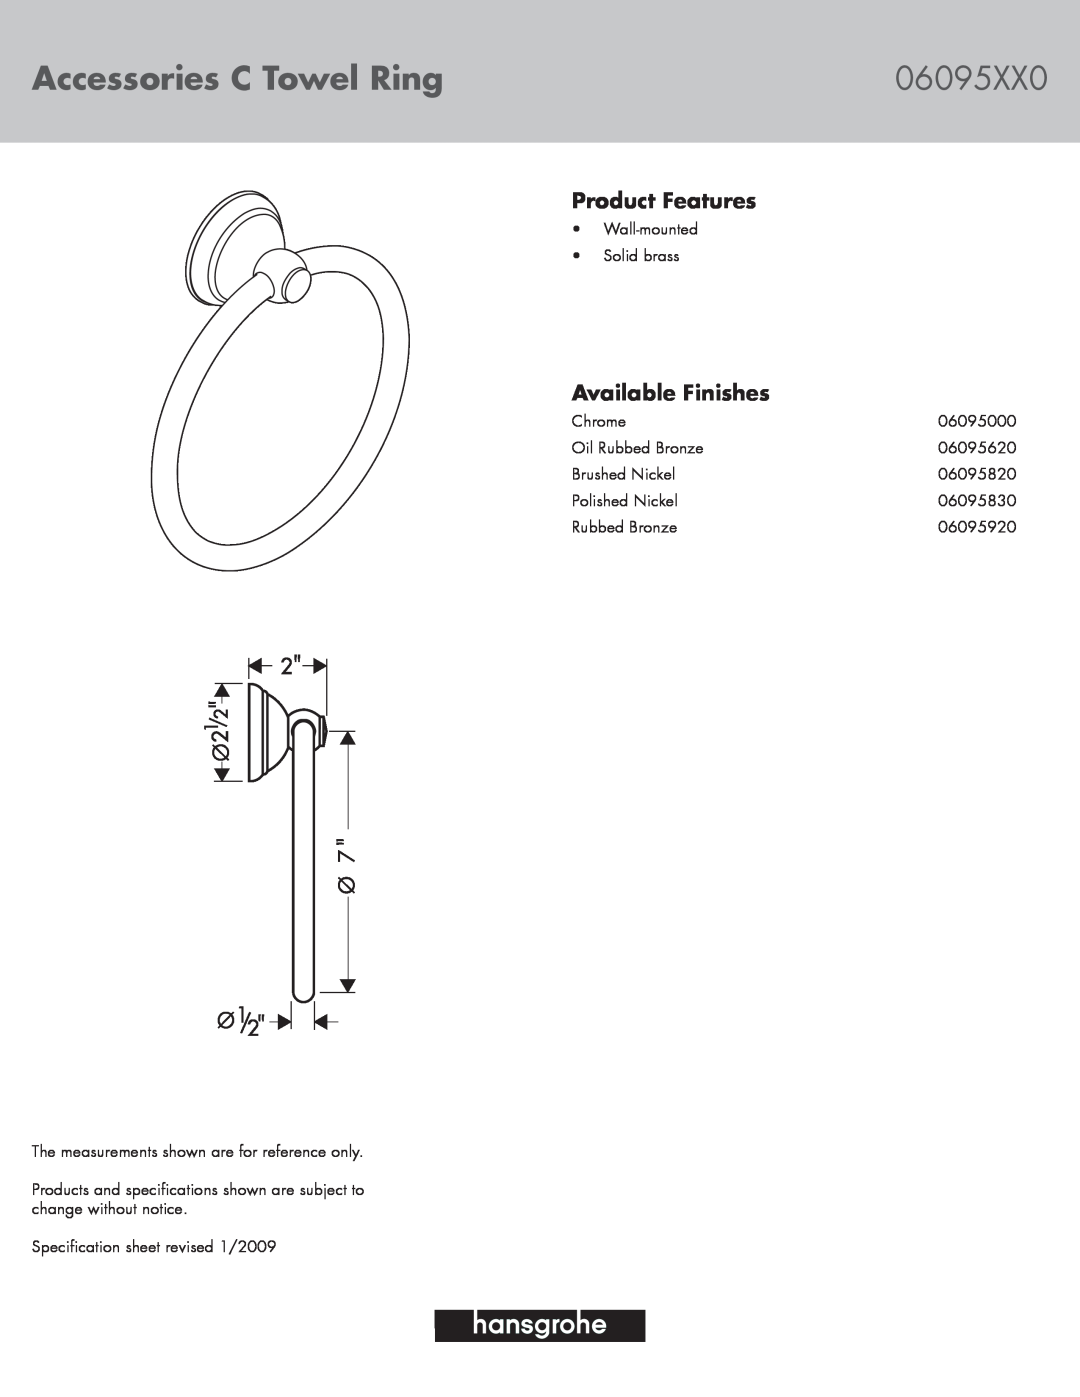 Axor 06095000, 06095830, 06095820 specifications Accessories C Towel Ring, 06095XX0, Product Features, Available Finishes 